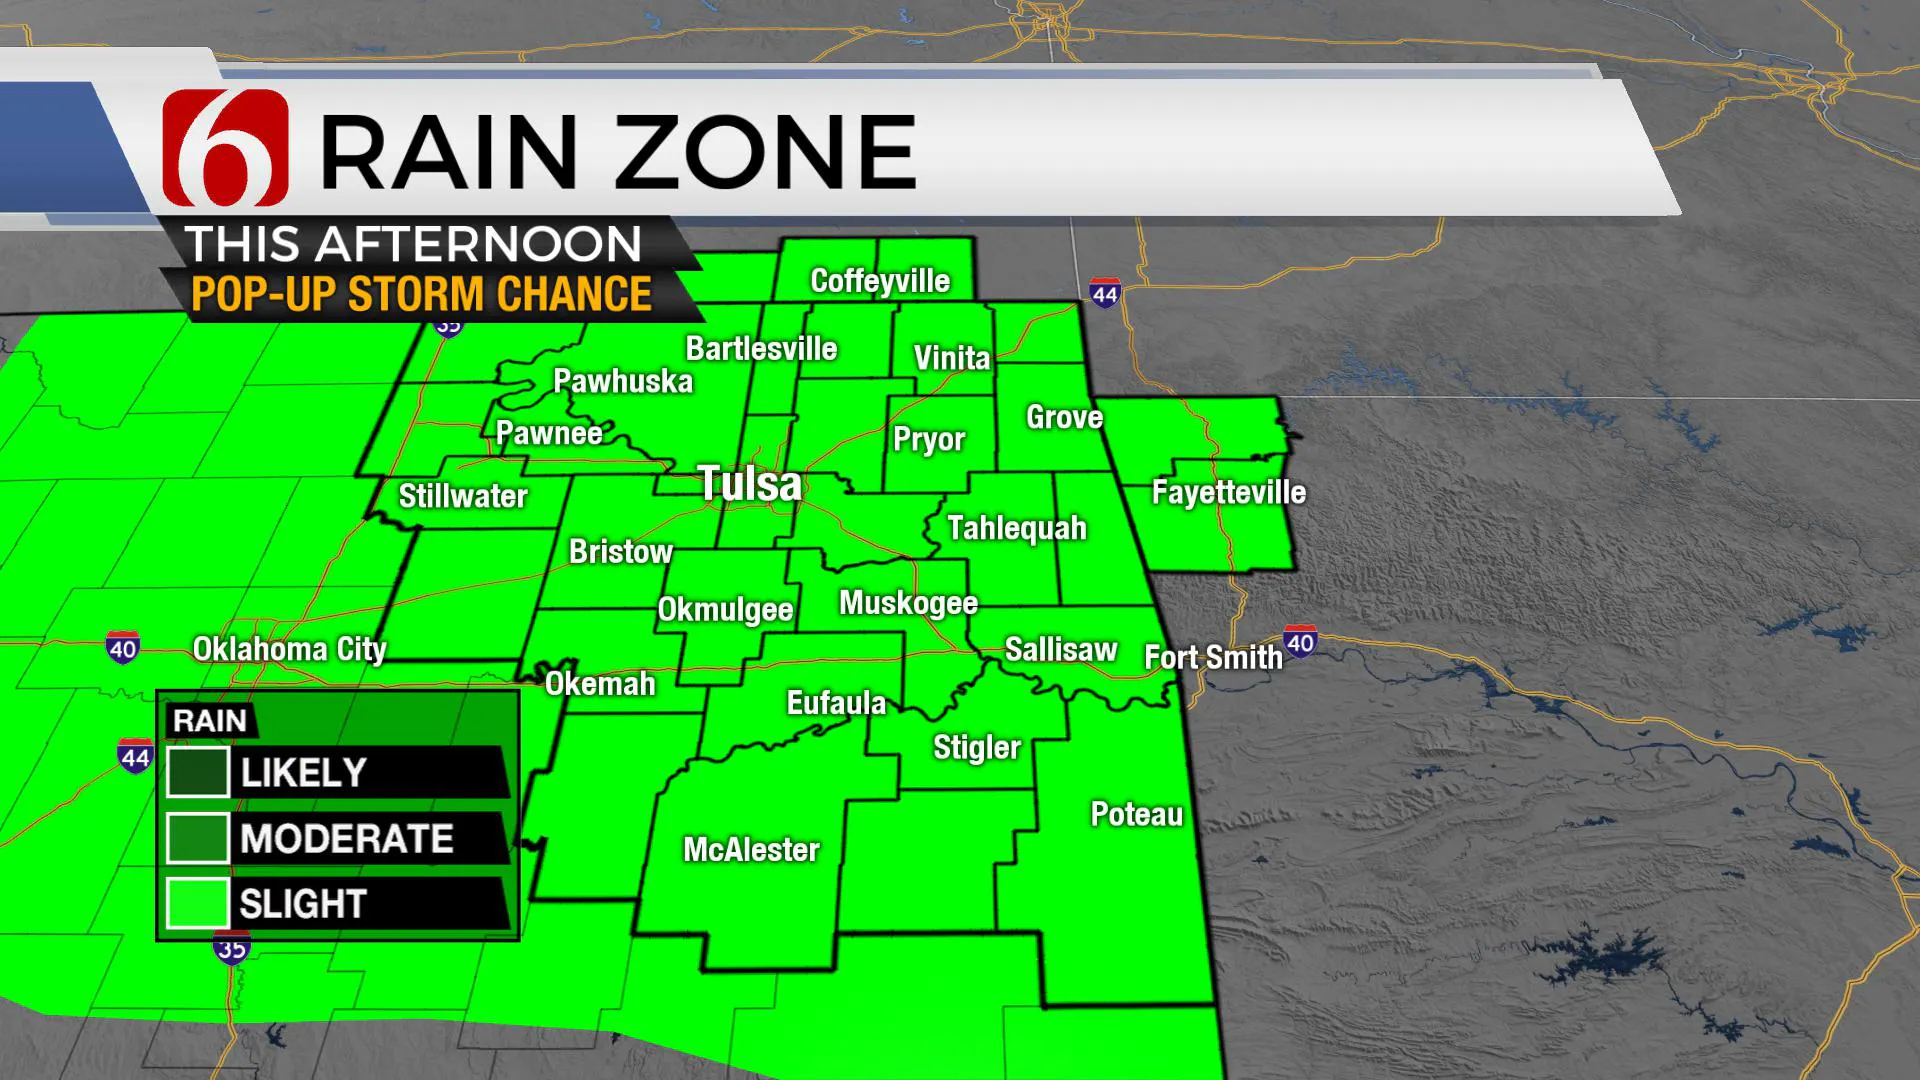 Rain Zone For Afternoon